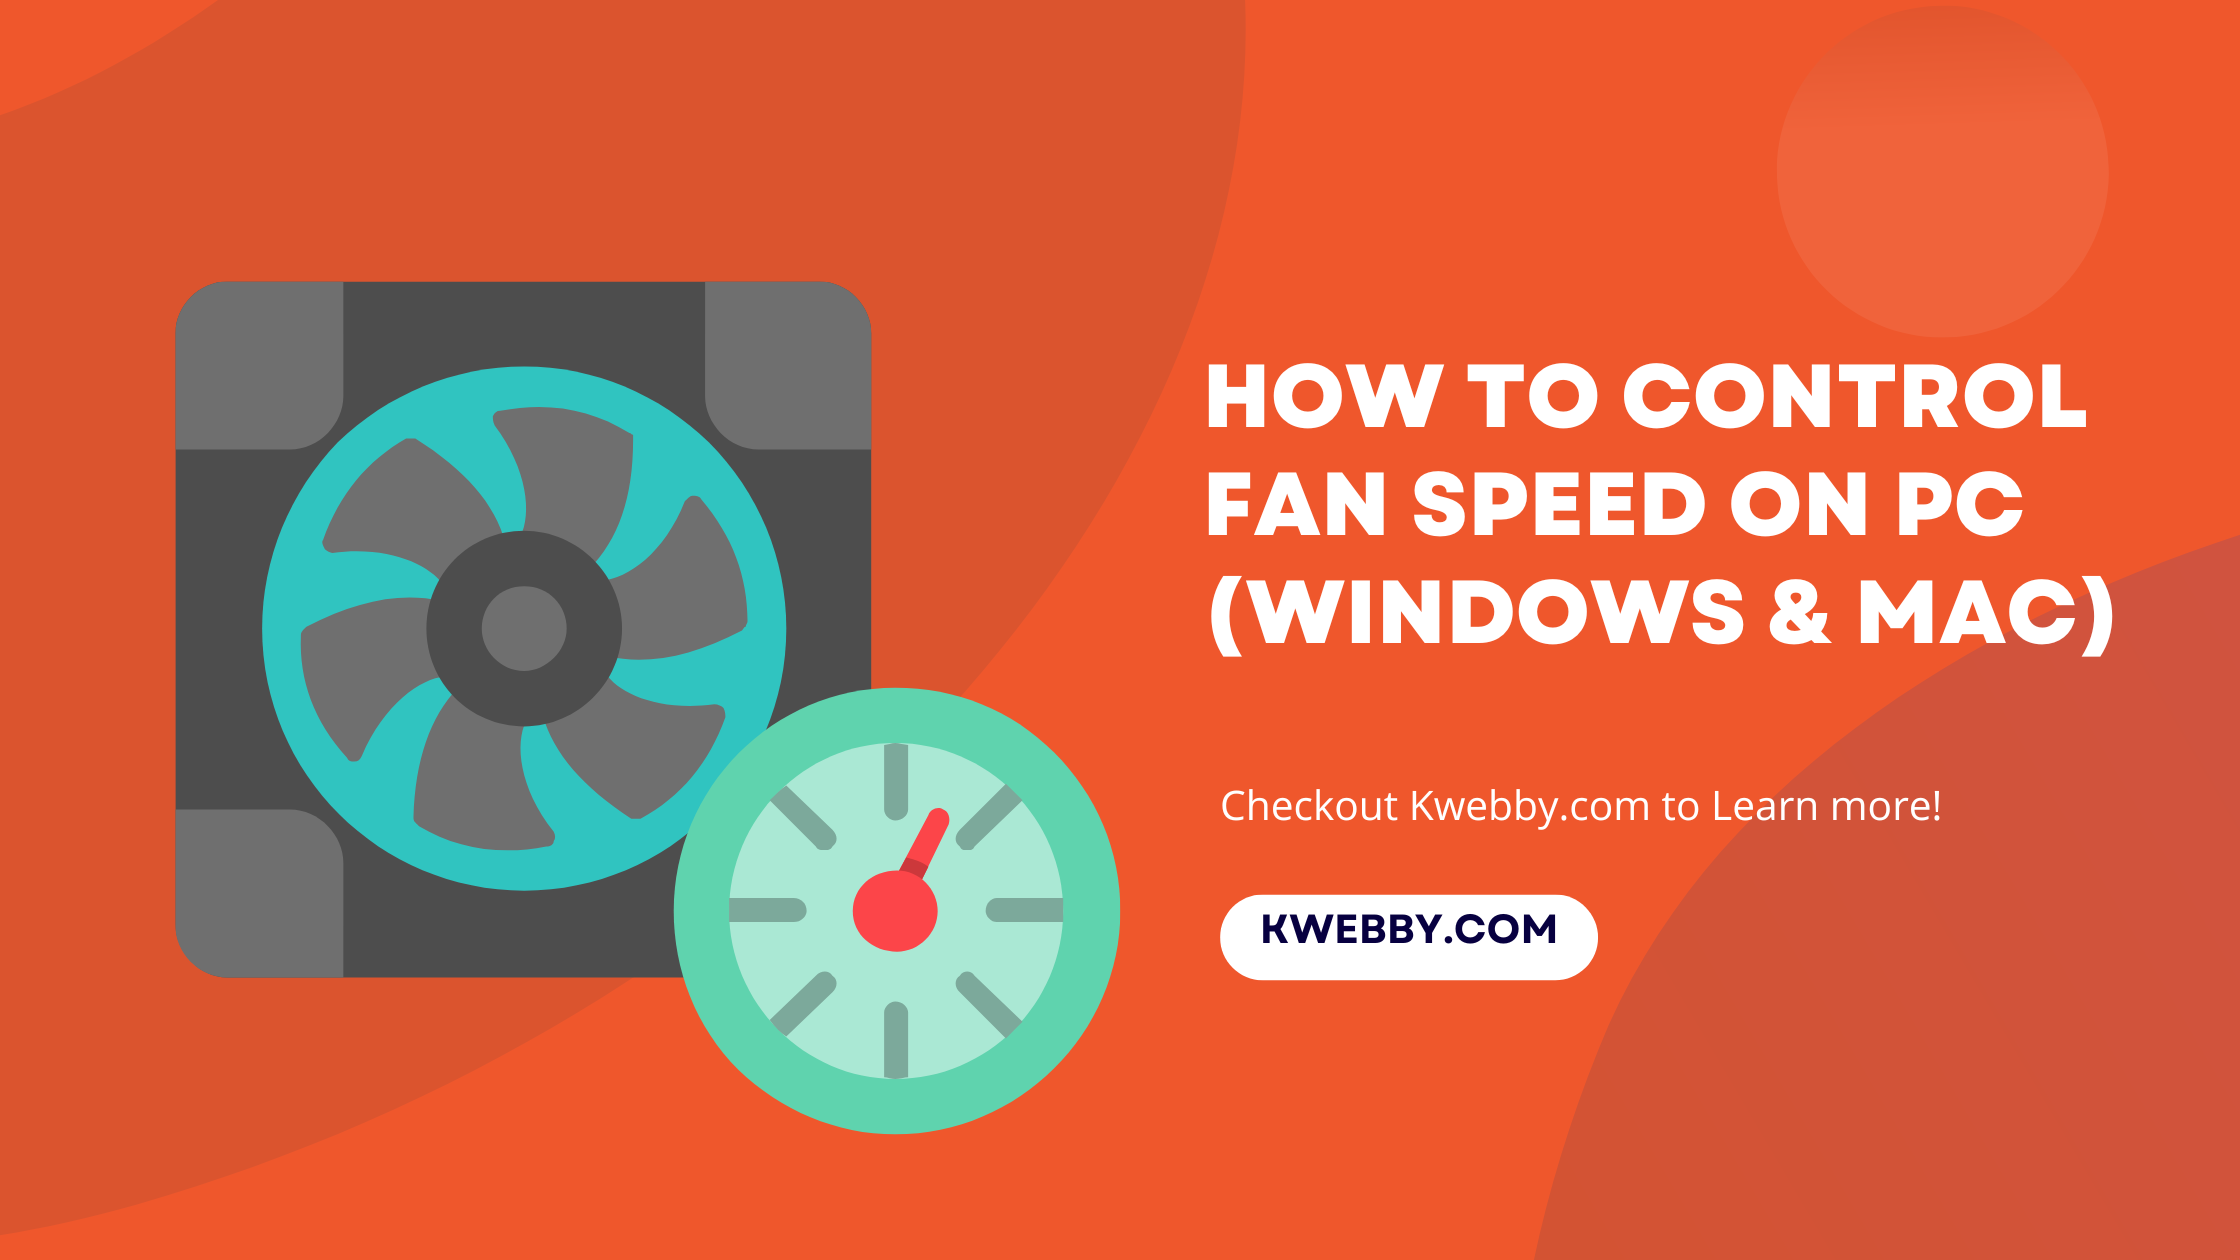 How to Control Fan Speed on PC